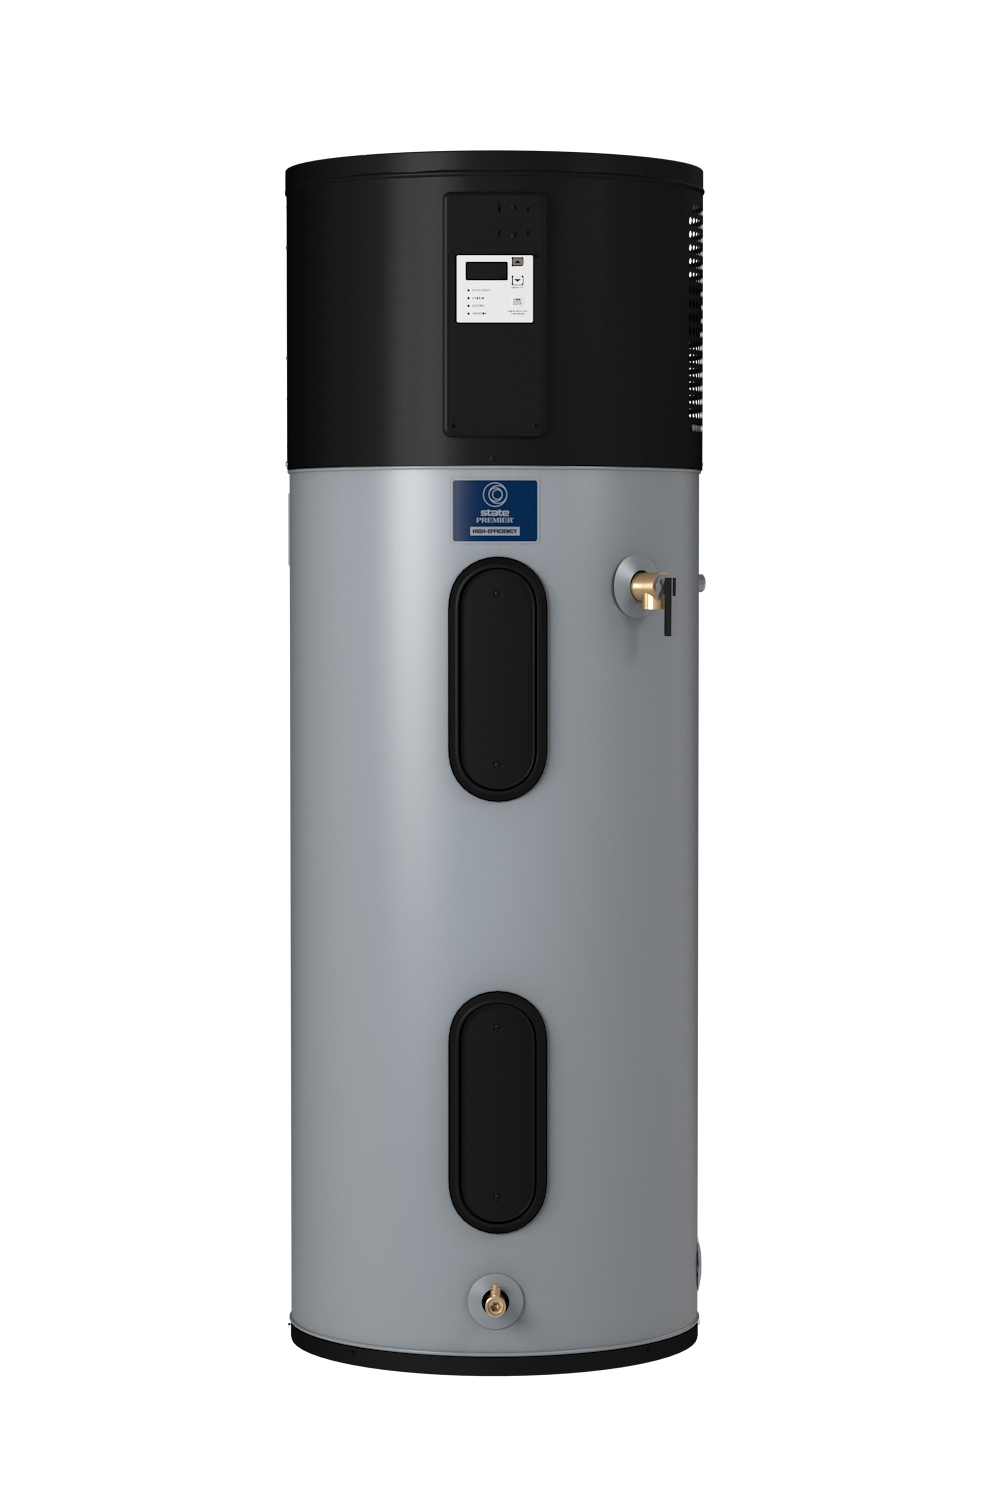 STATE 80 GAL HYBRID ELECTRIC
WATER HEATER HPX 80 DHPTNE